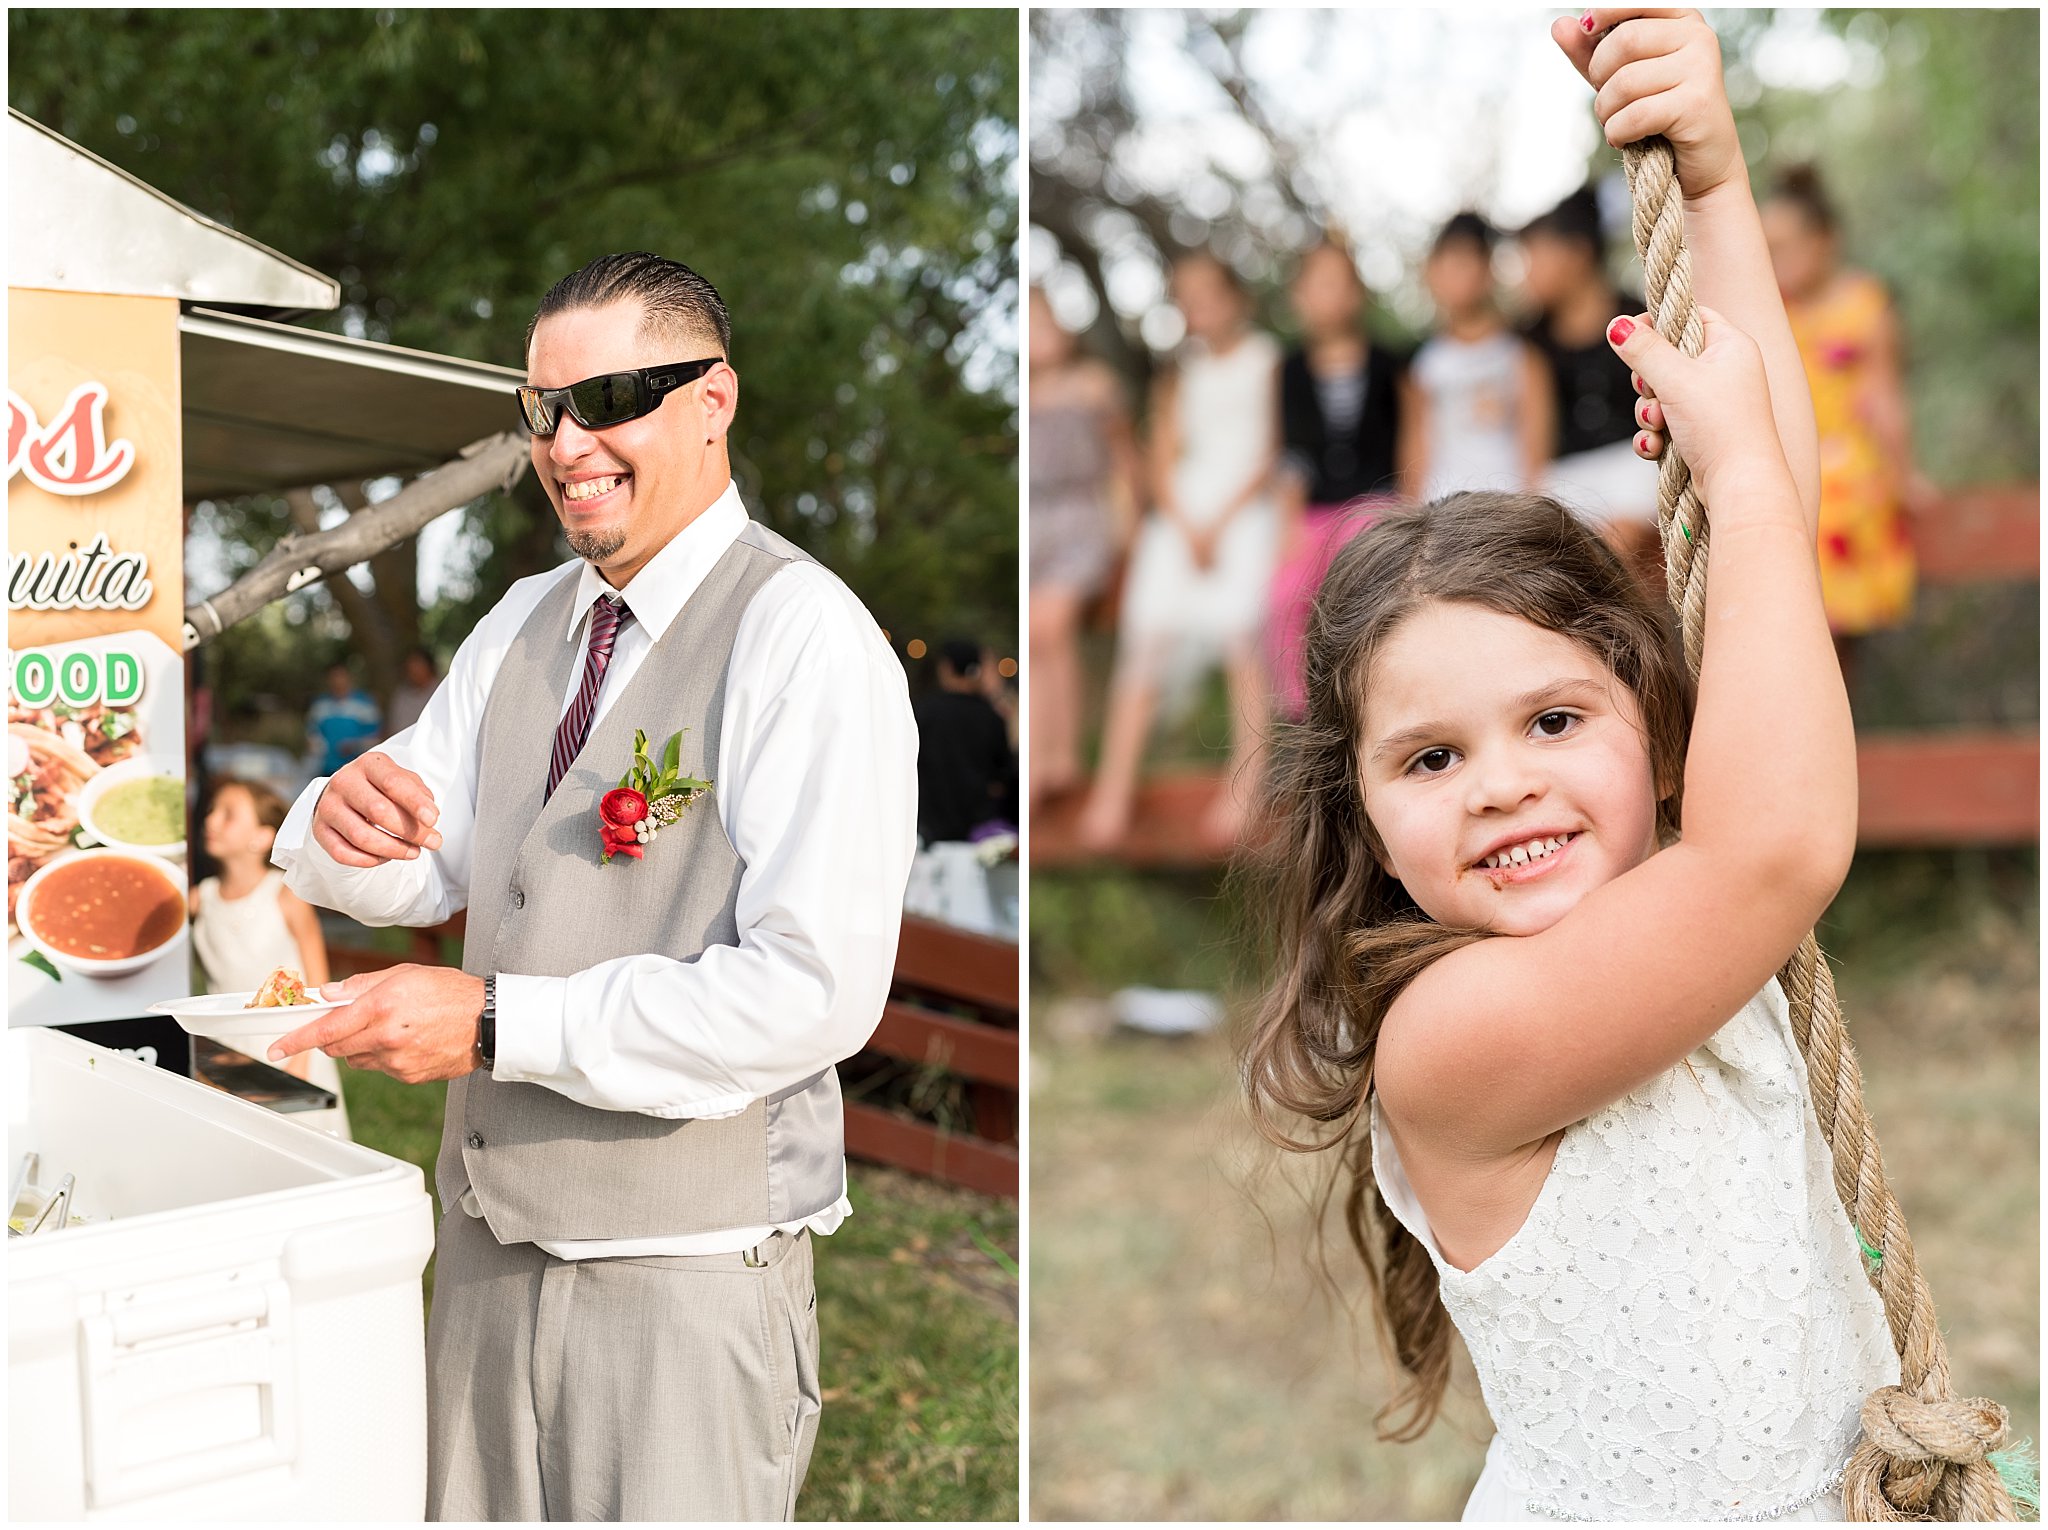 Tacos truck and kid's swing during wedding reception | Red and Grey wedding | Davis County Outdoor Wedding | Jessie and Dallin Photography